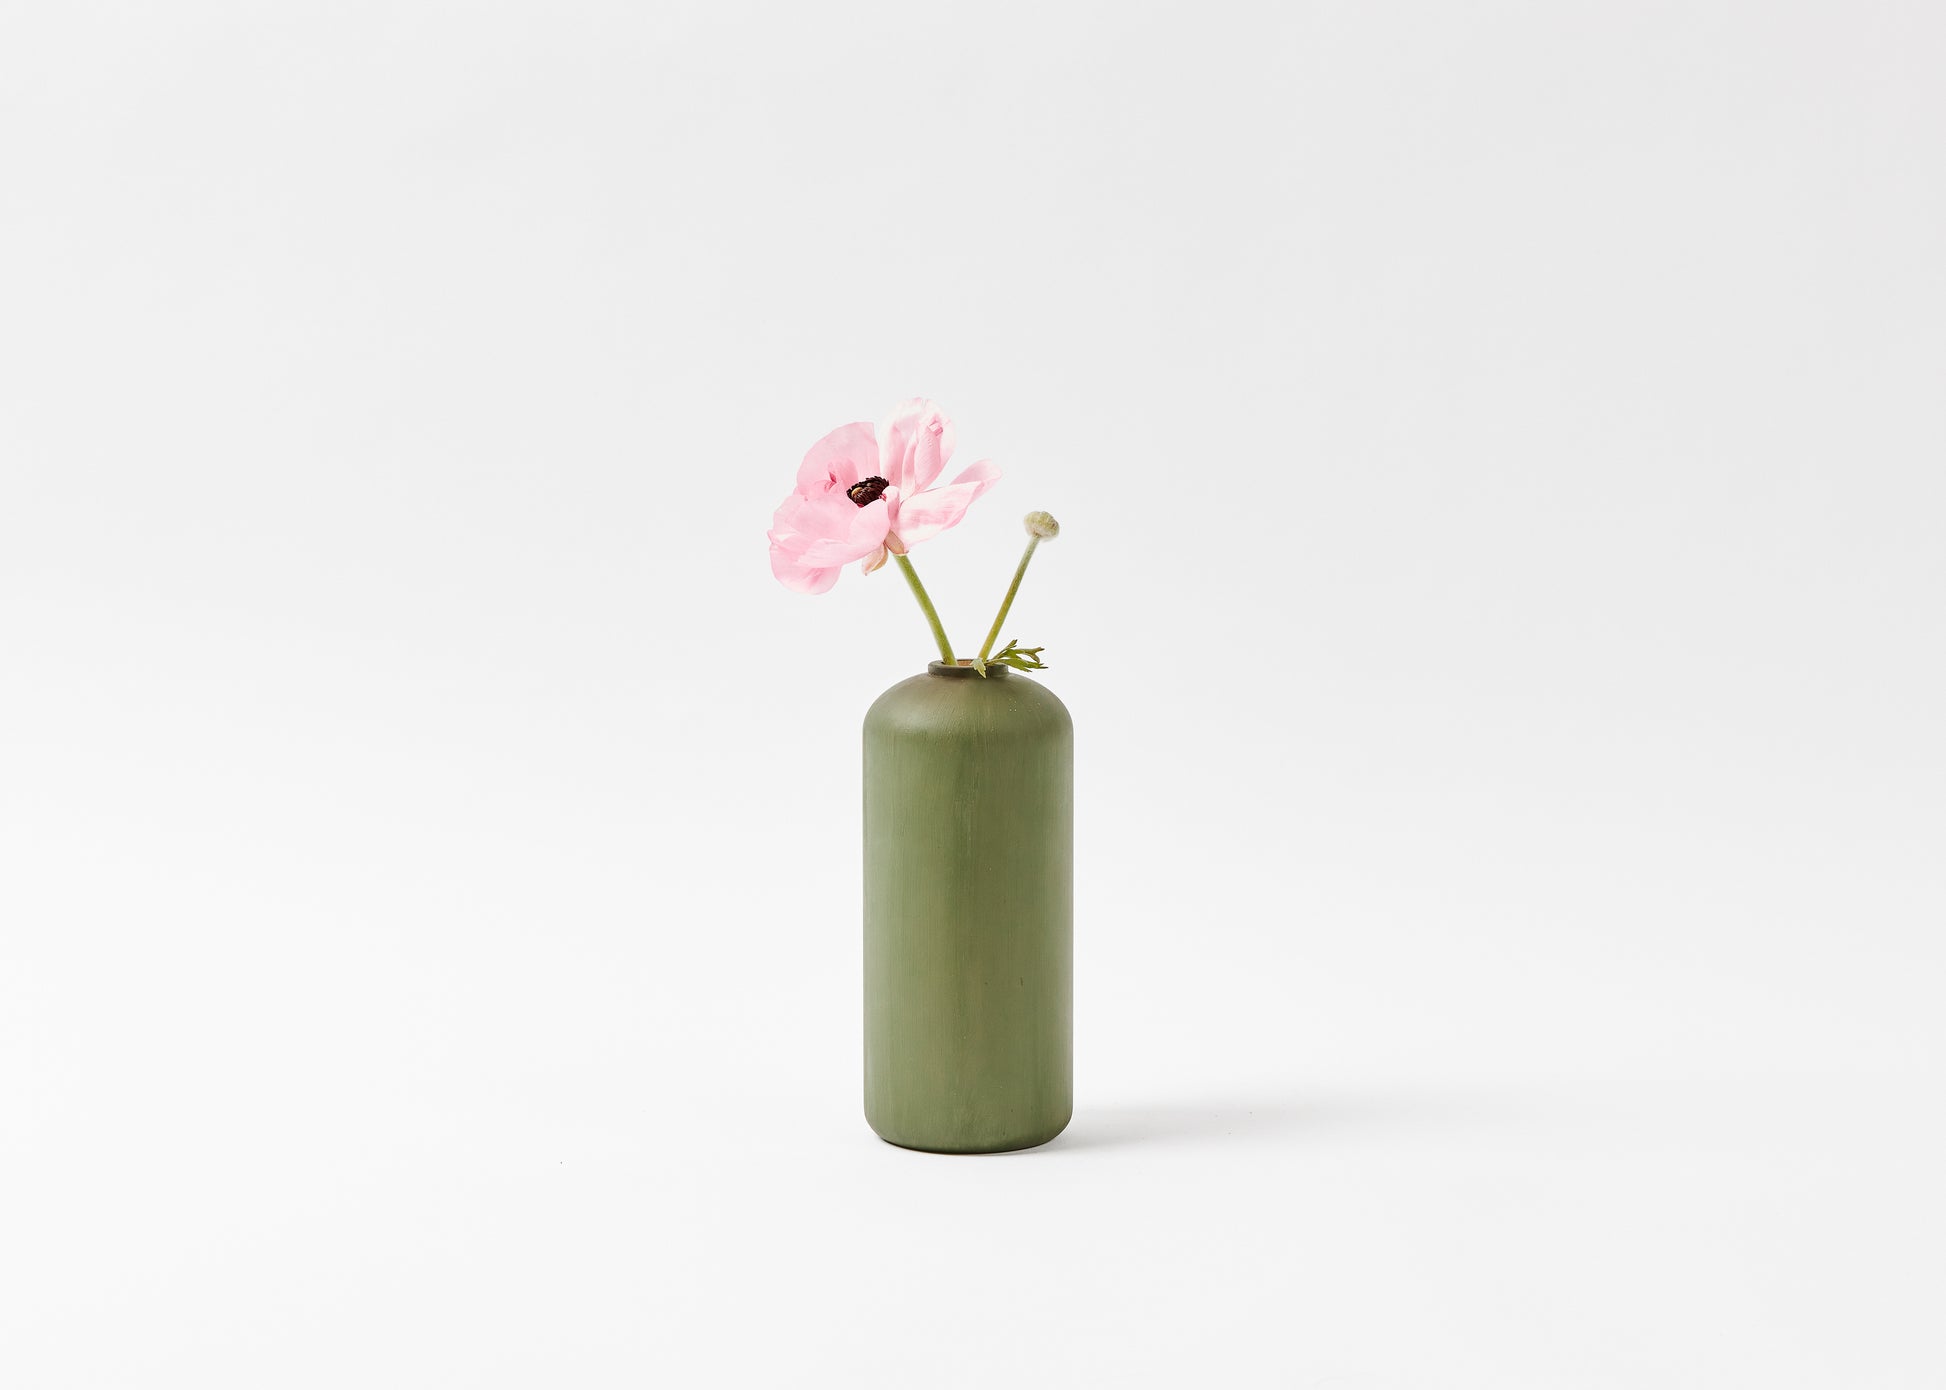 Tall vase in sage green with pink flower in vase. Hand painted | Melanie Abrantes Designs.